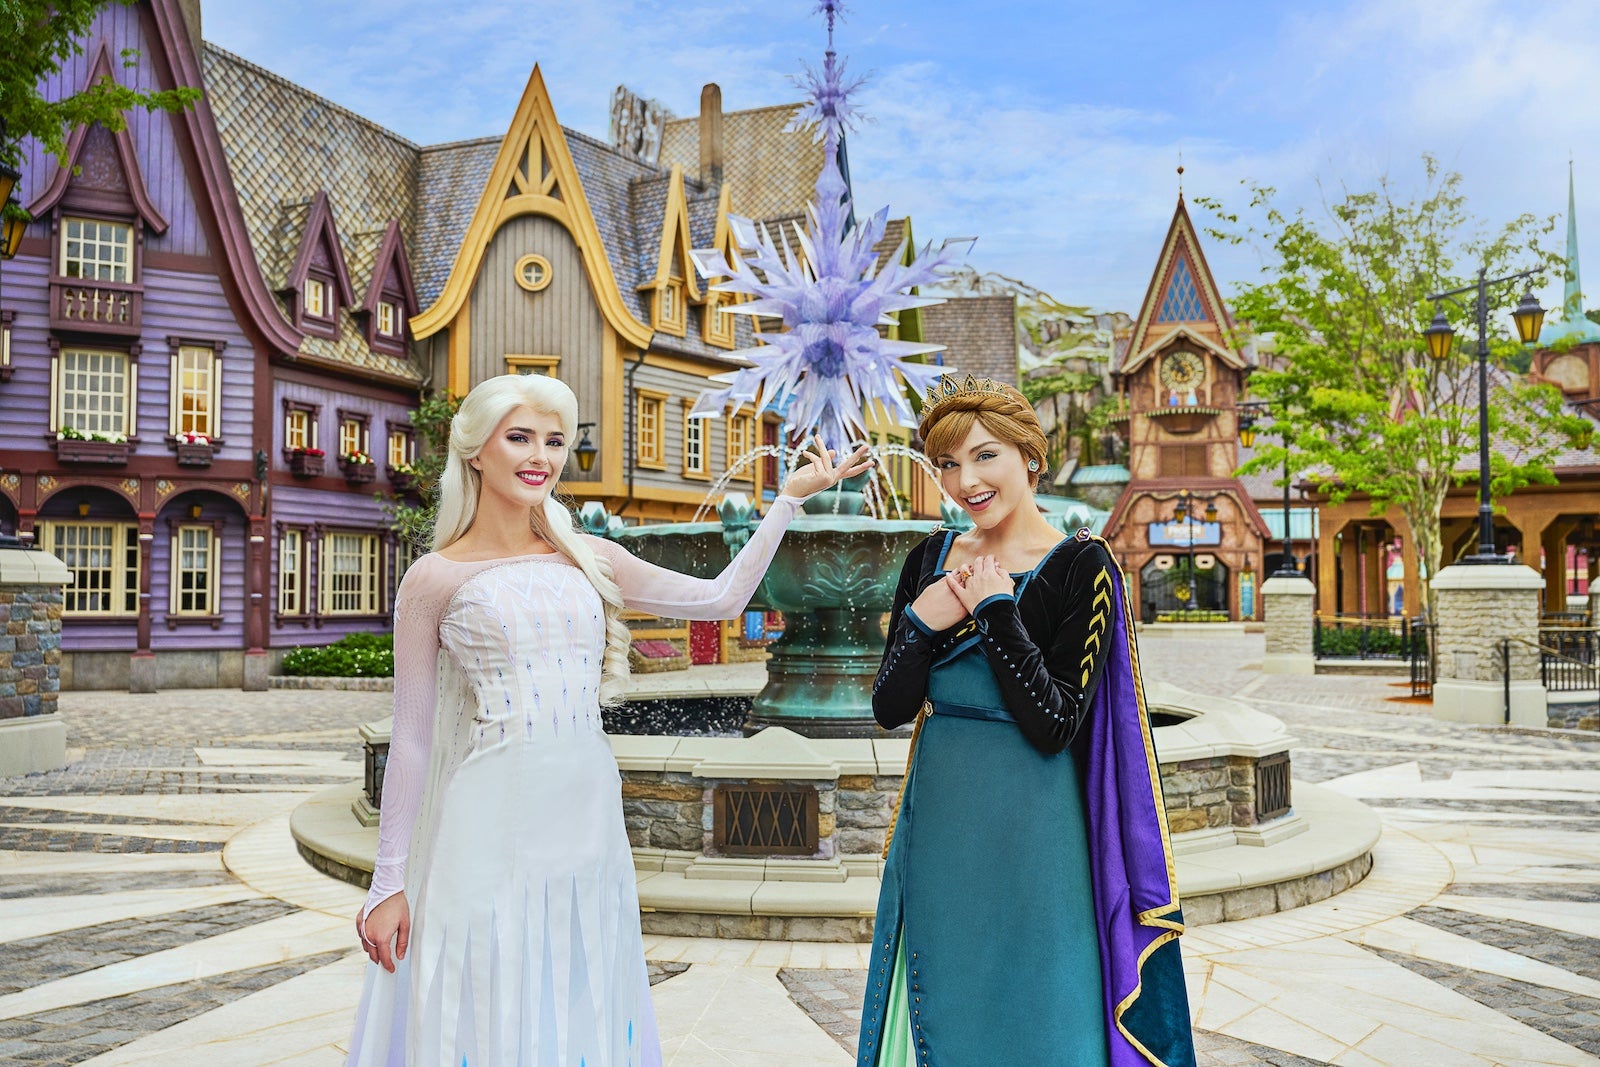 Take a first look at Hong Kong Disneyland's new 'Frozen' land - The Points Guy